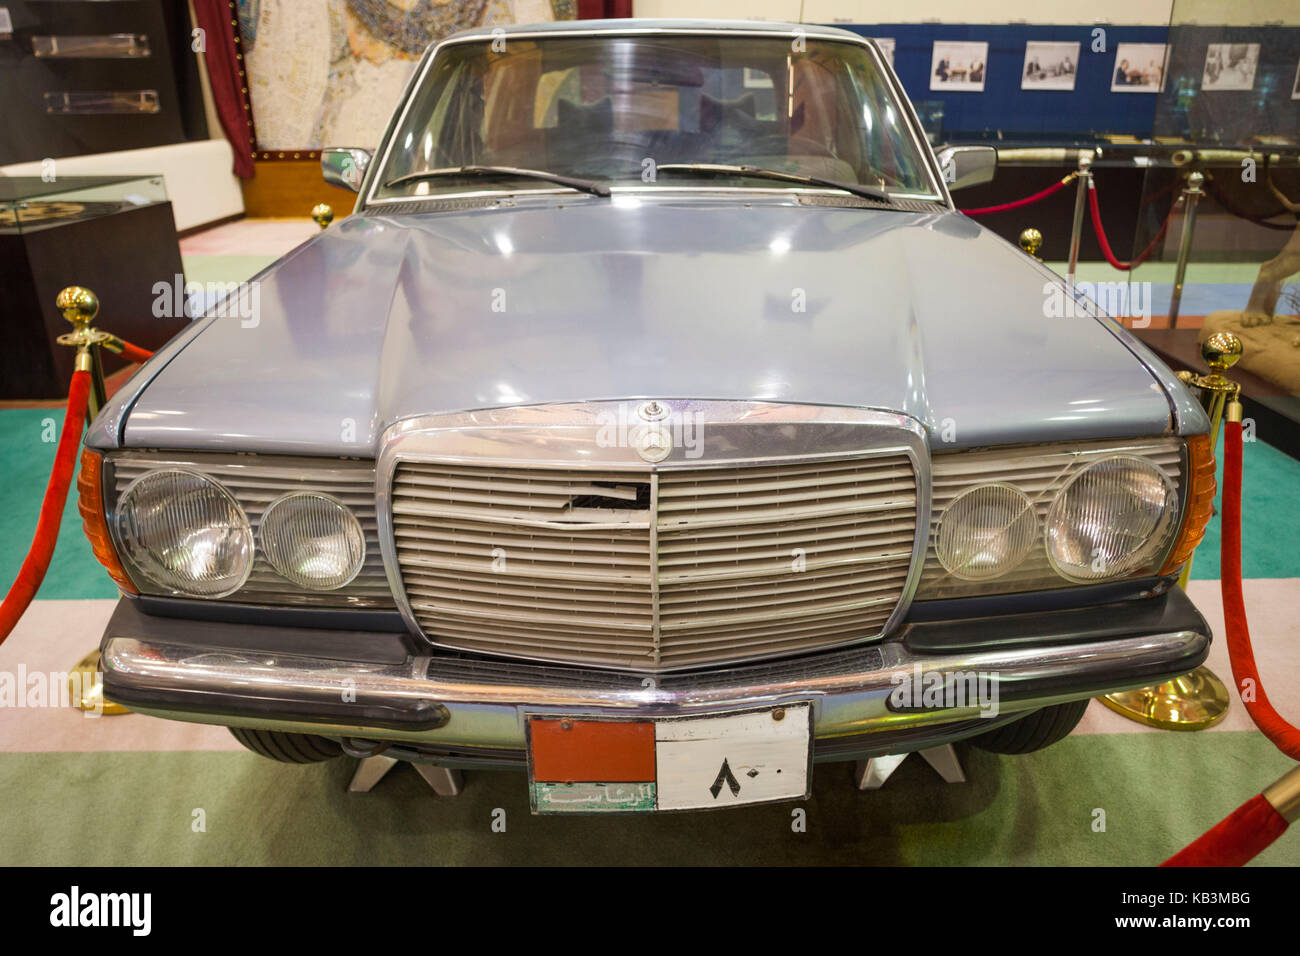 Vae, Abu Dhabi, Sheikh Zayed Research Centre, Royal Car Collection, Mercedes Limousine Stockfoto